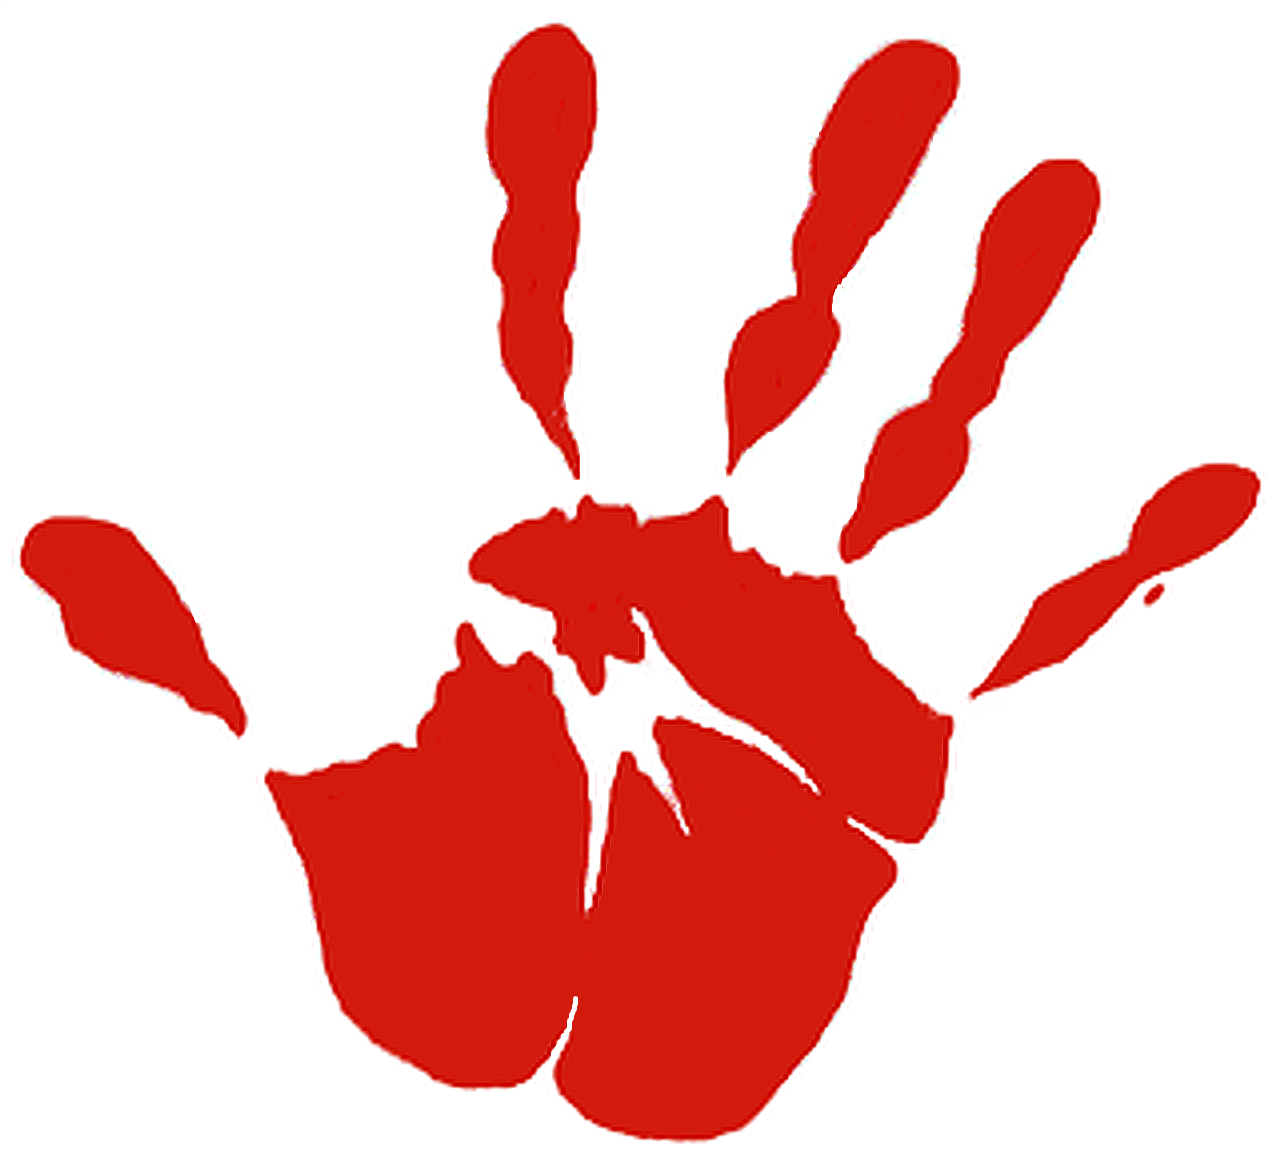 Red Hands Logo - Pictures of Two Red Hands Logo - www.kidskunst.info